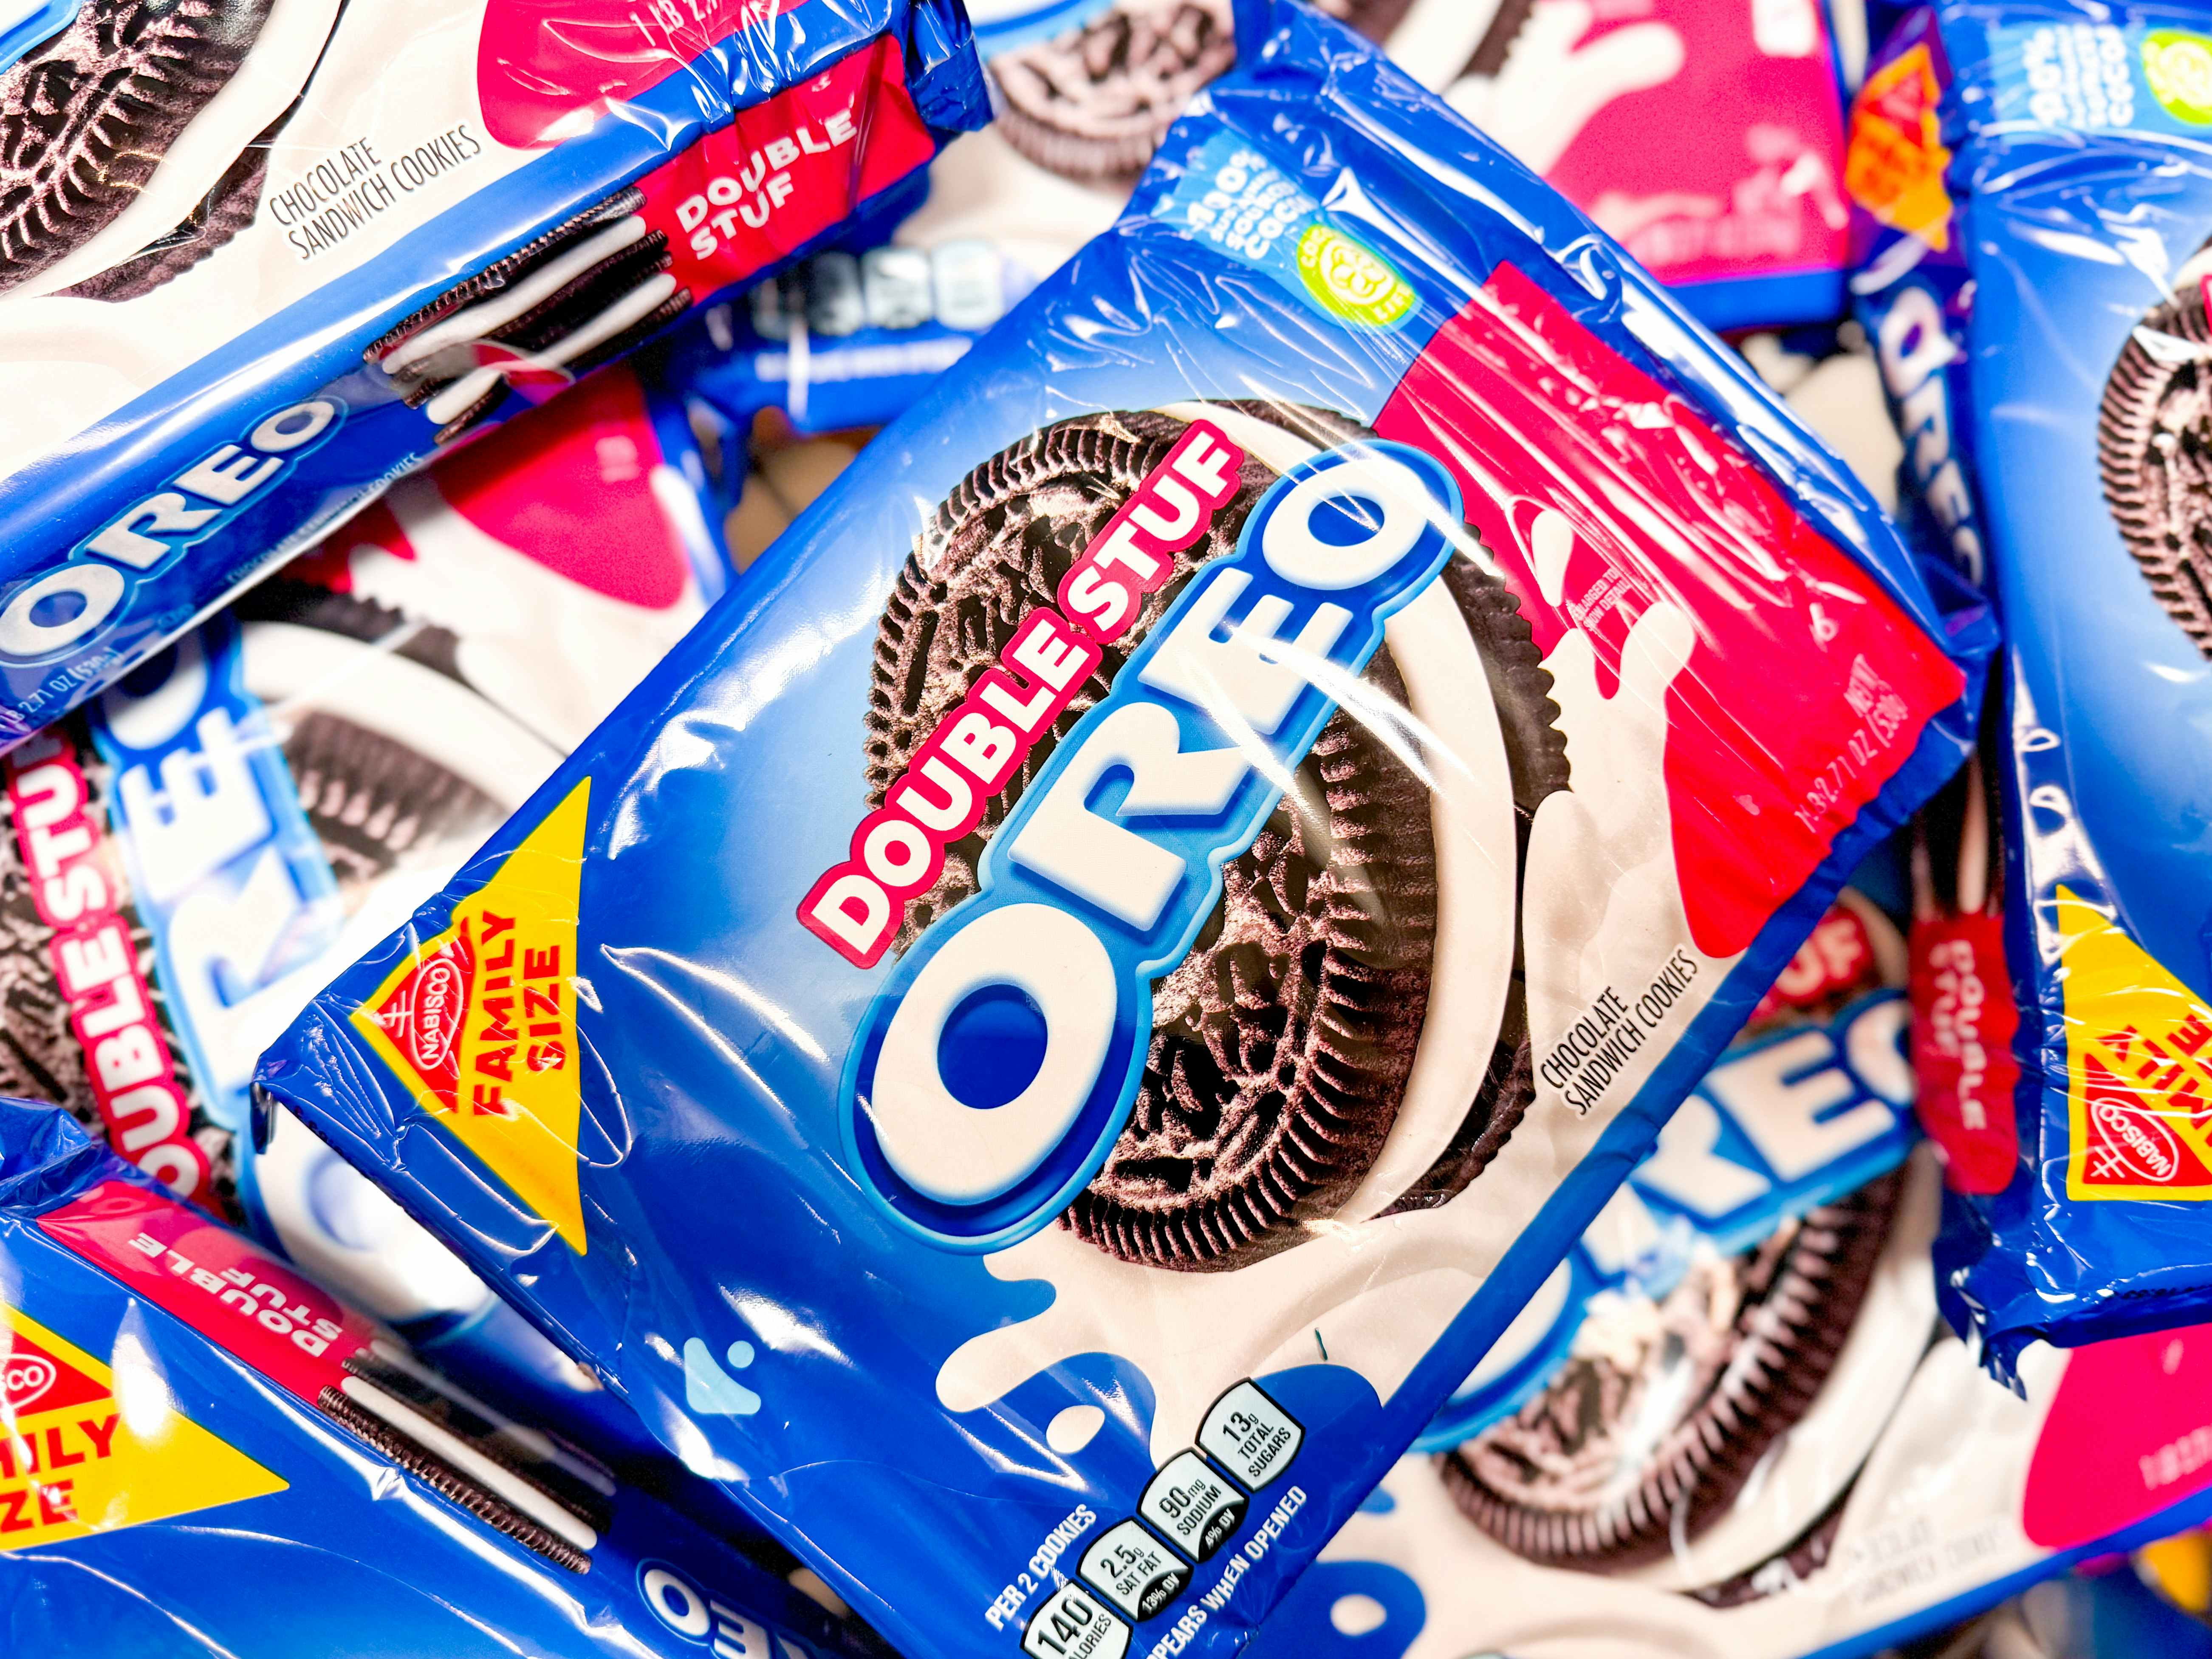 25% Off Coupon: Oreo Family Packs, as Low as $2.39 on Amazon